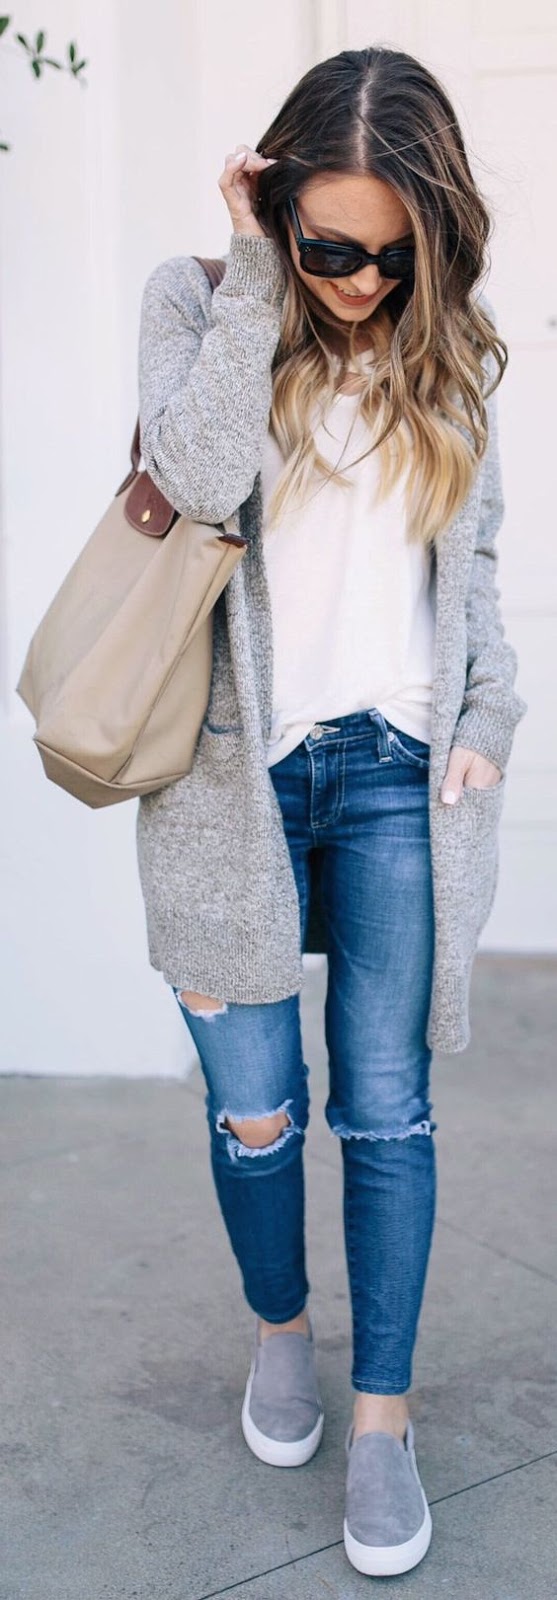 fall outfit of the day | grey cardigan + top + ripped jeans + bag